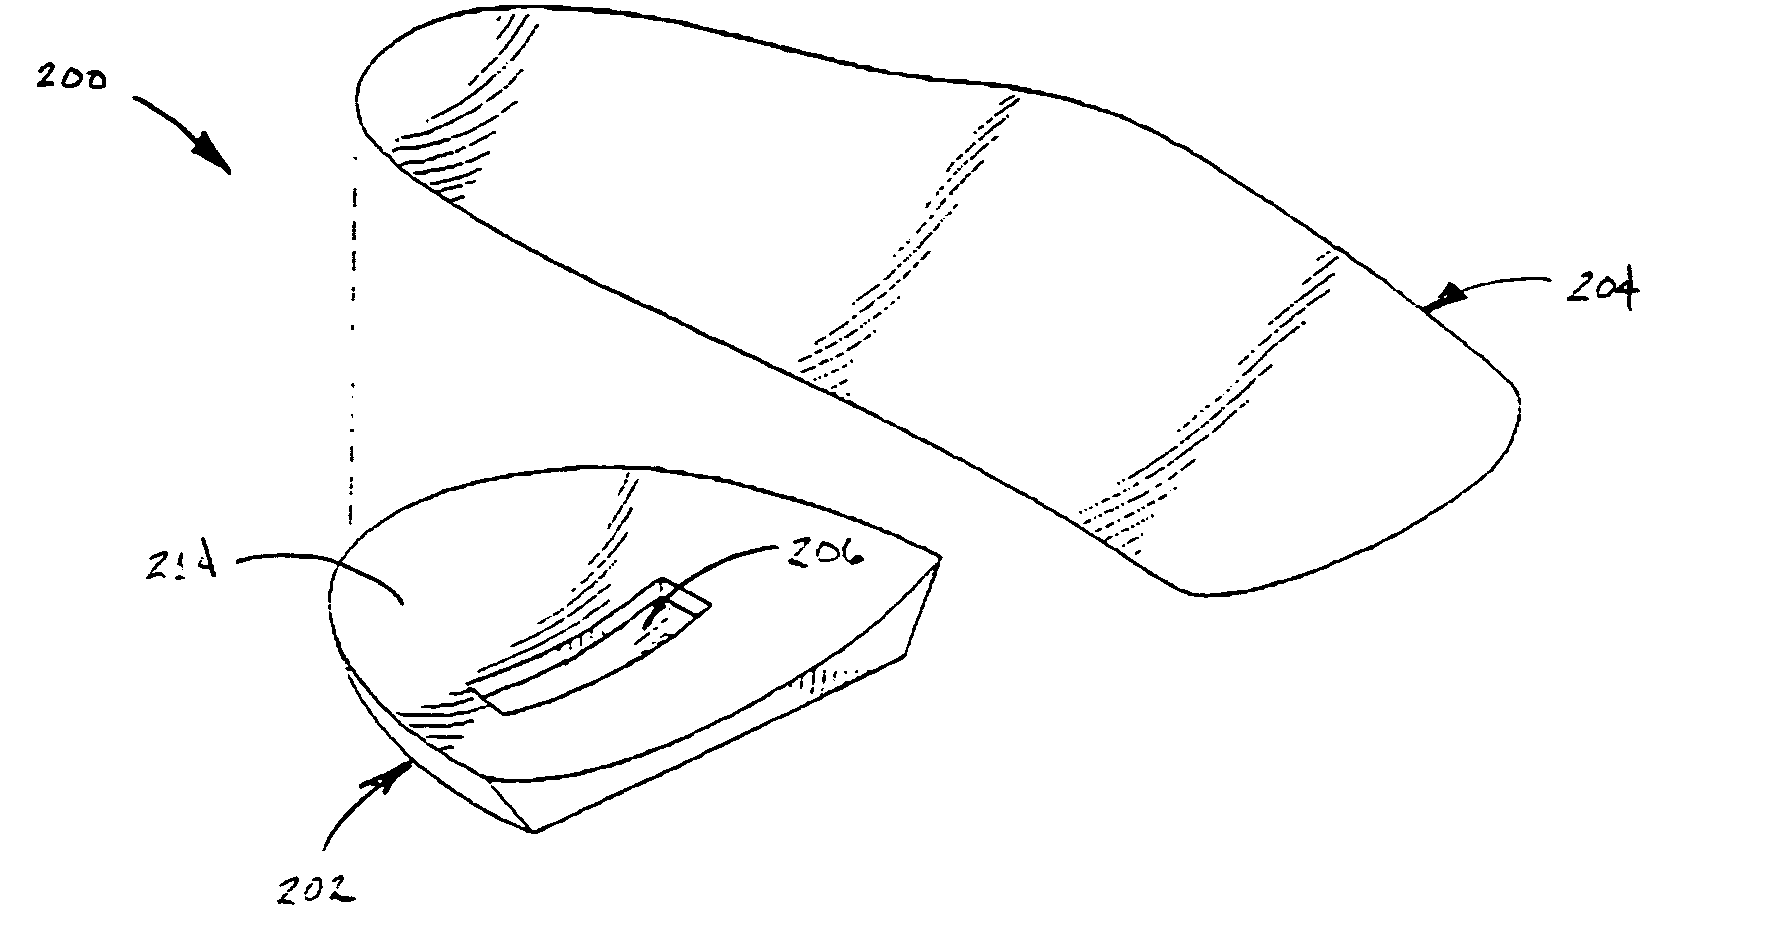 Orthotic assembly having stationary heel post and separate orthotic plate